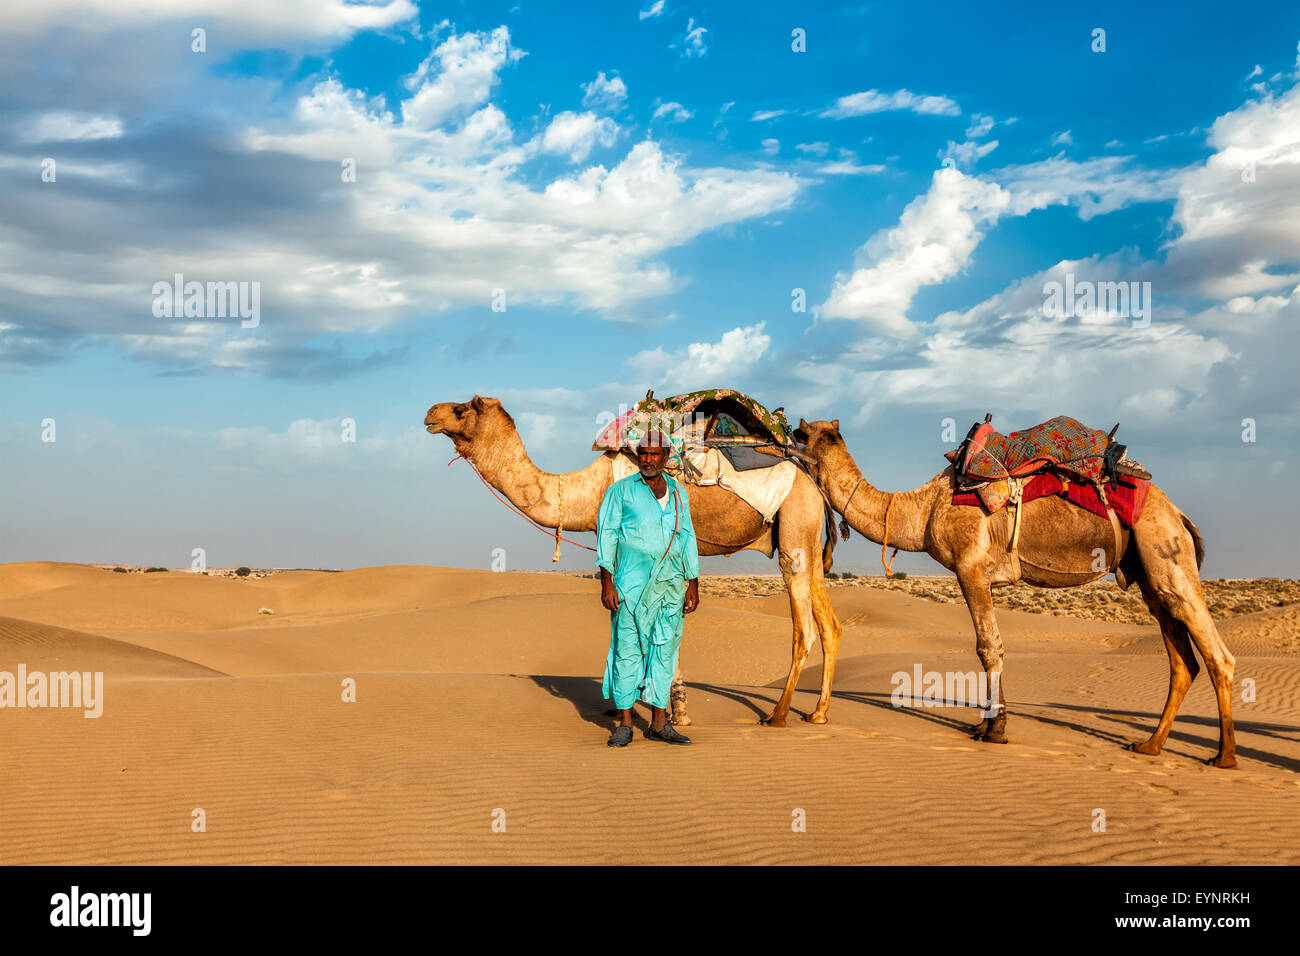 Cameleer camel driver with camels in Rajasthan, India Stock Photo